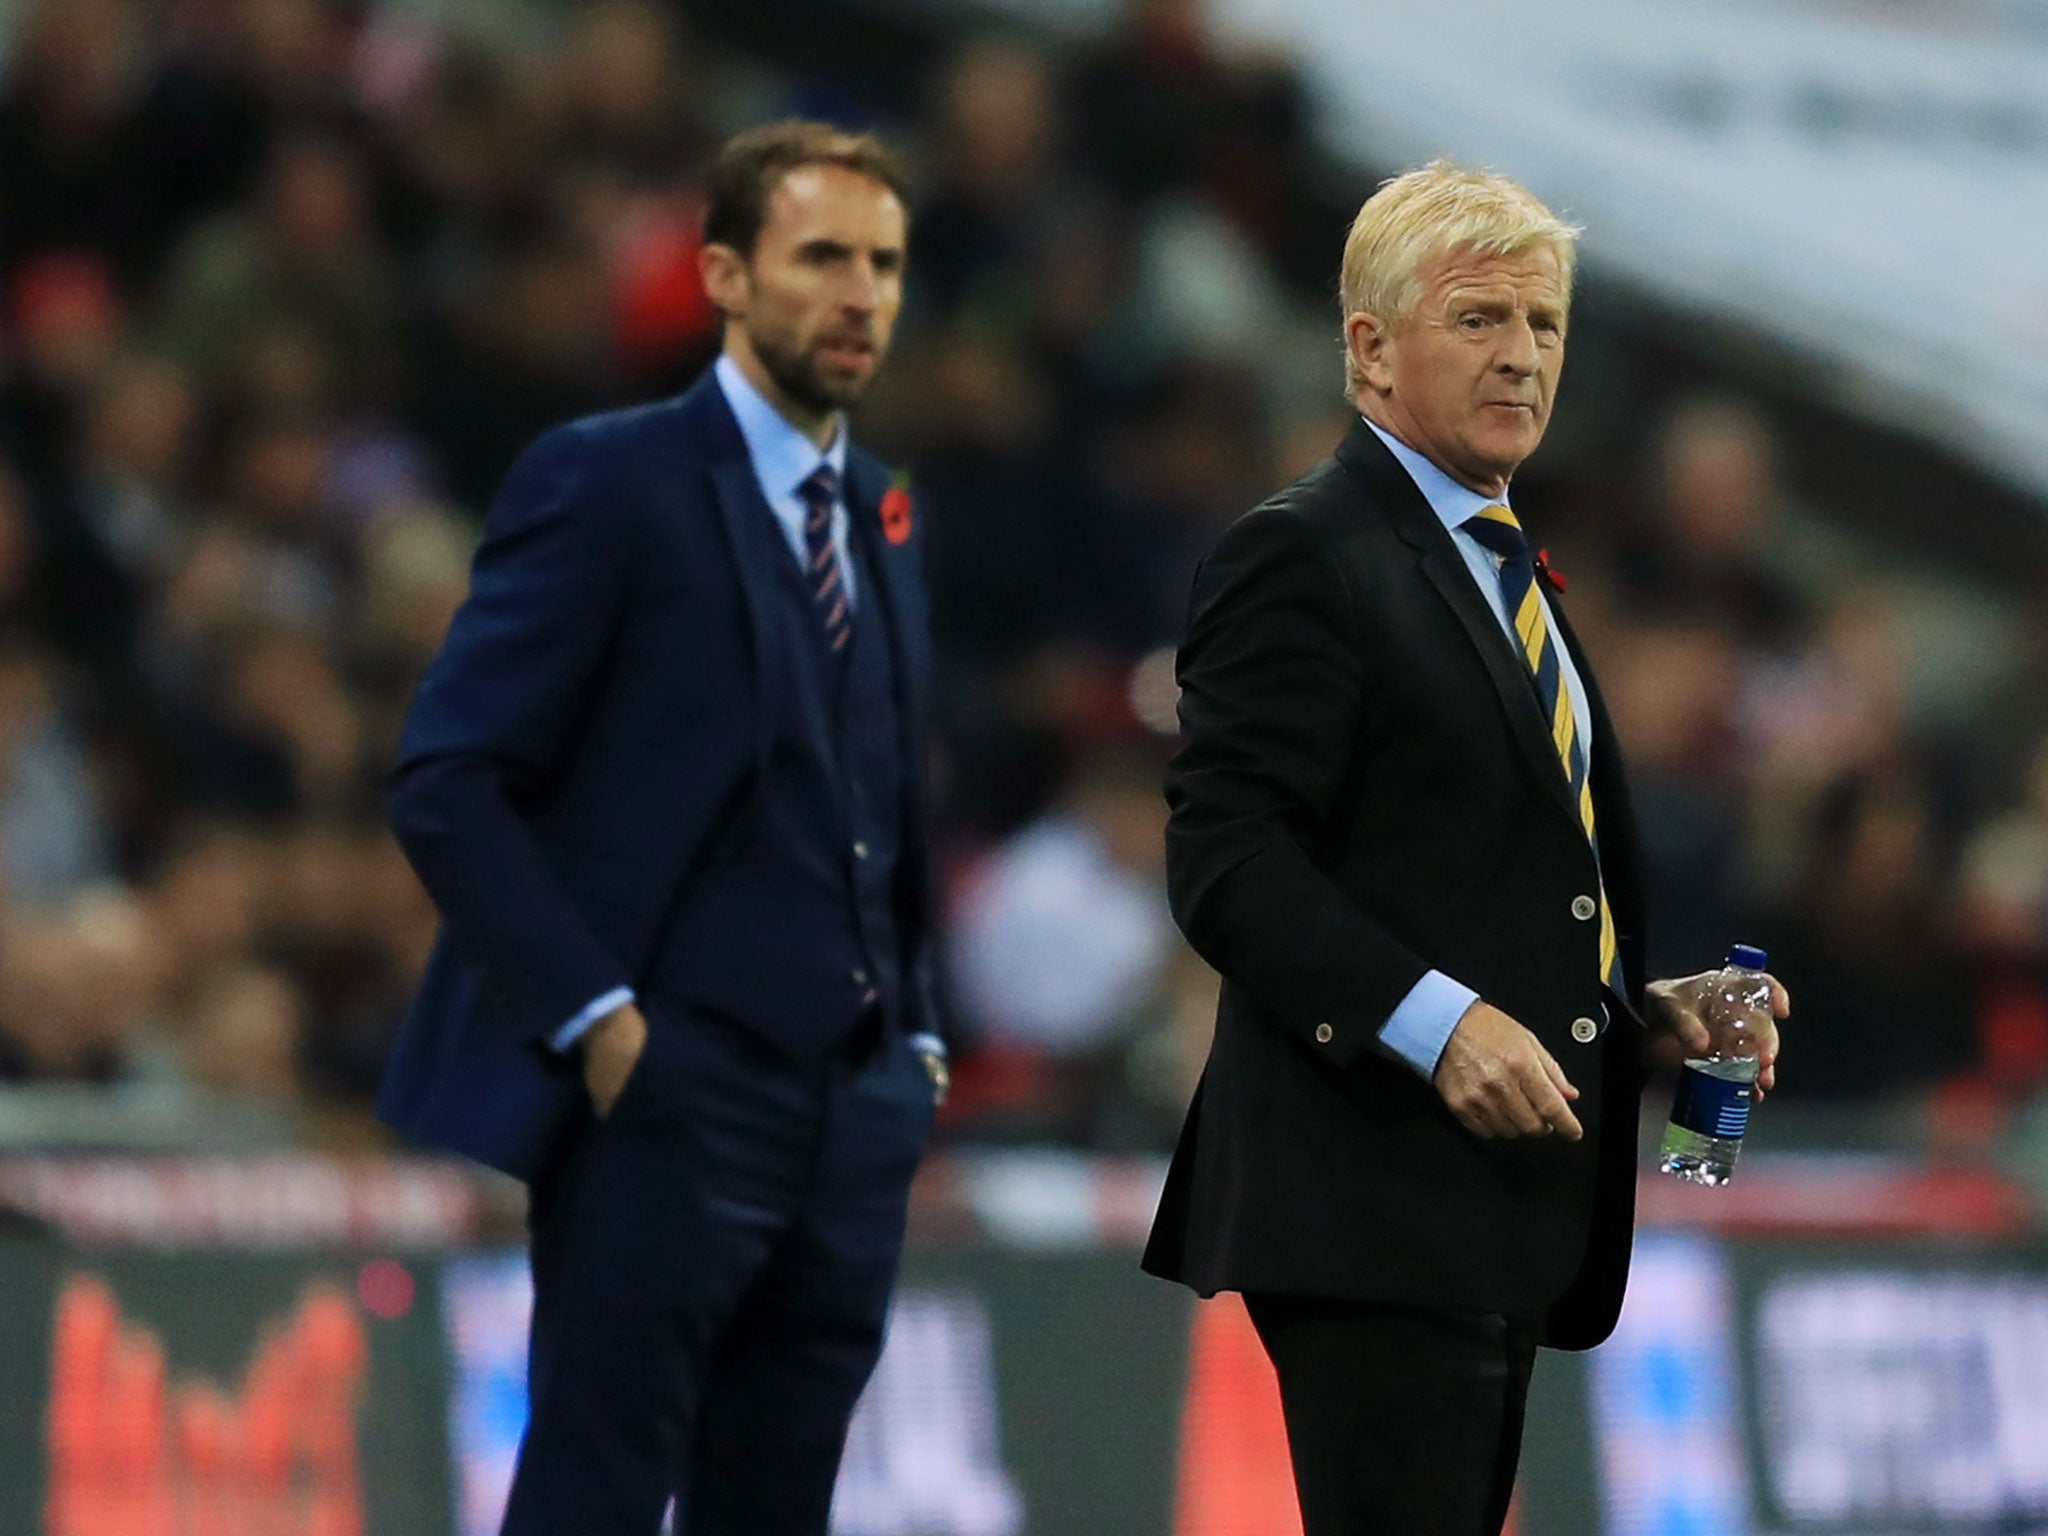 There is expected to be contrasting fortunes for the two men on the Wembley touchline